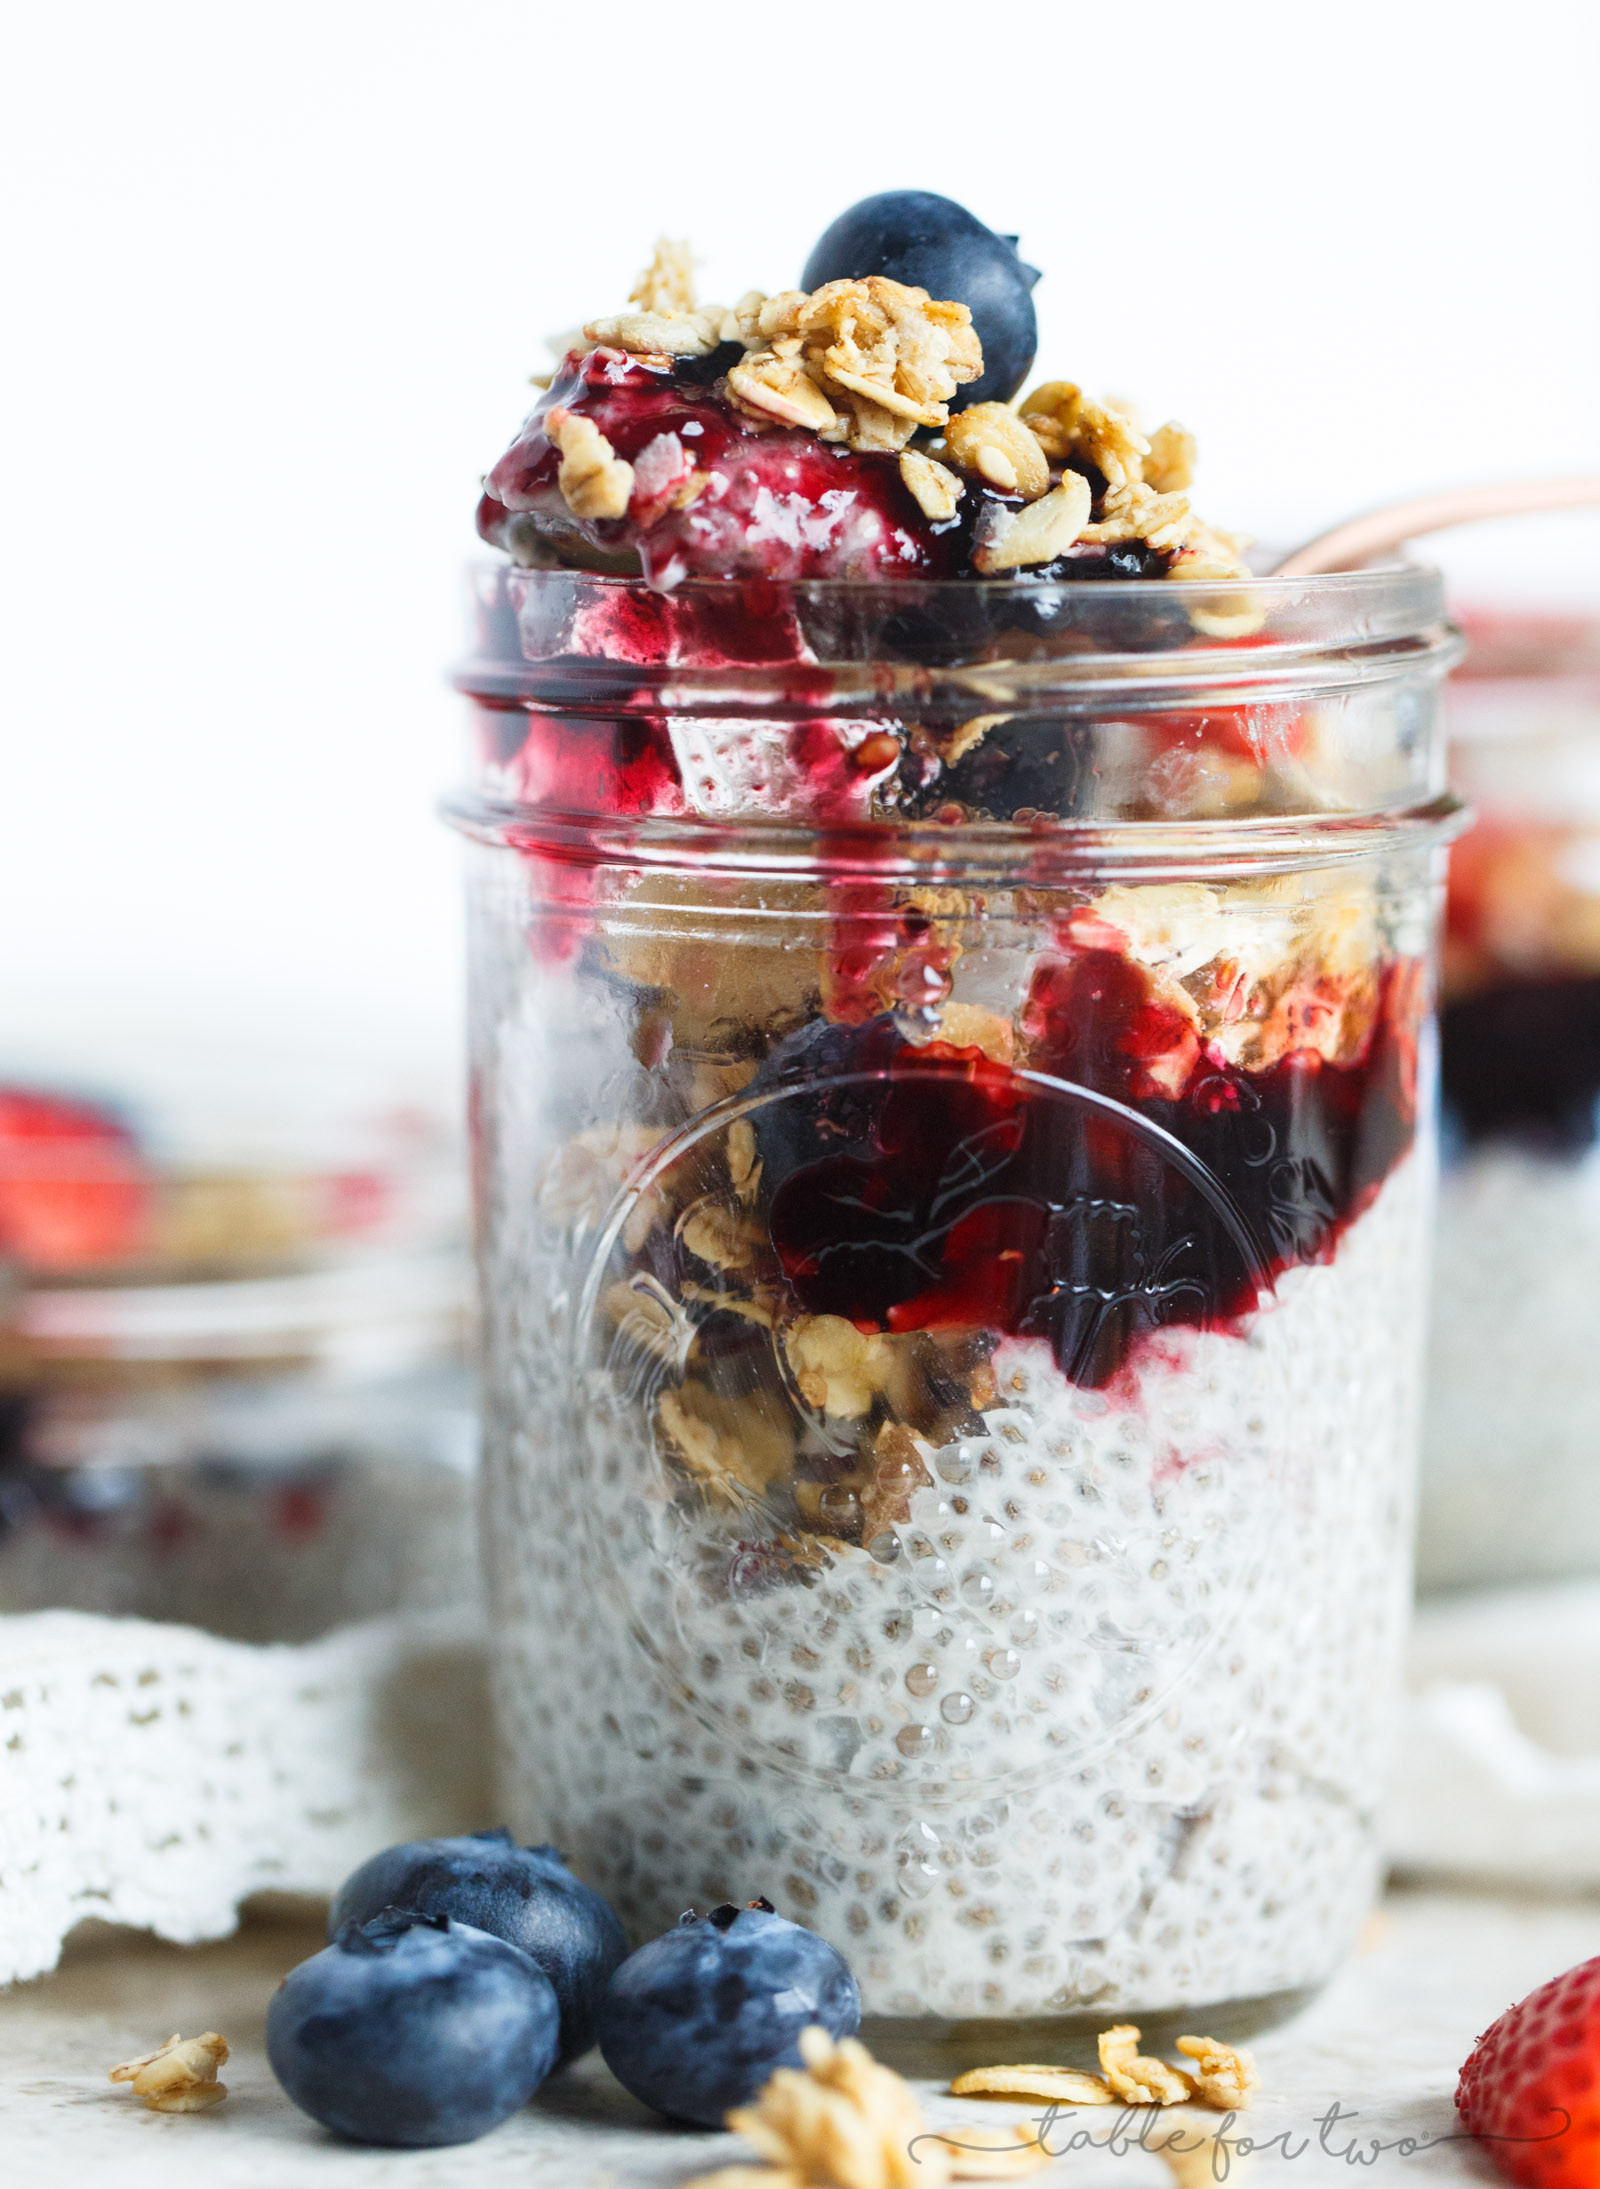 Chia Seeds Breakfast Recipes
 Coconut Chia Seed Pudding with Berries and Granola Table